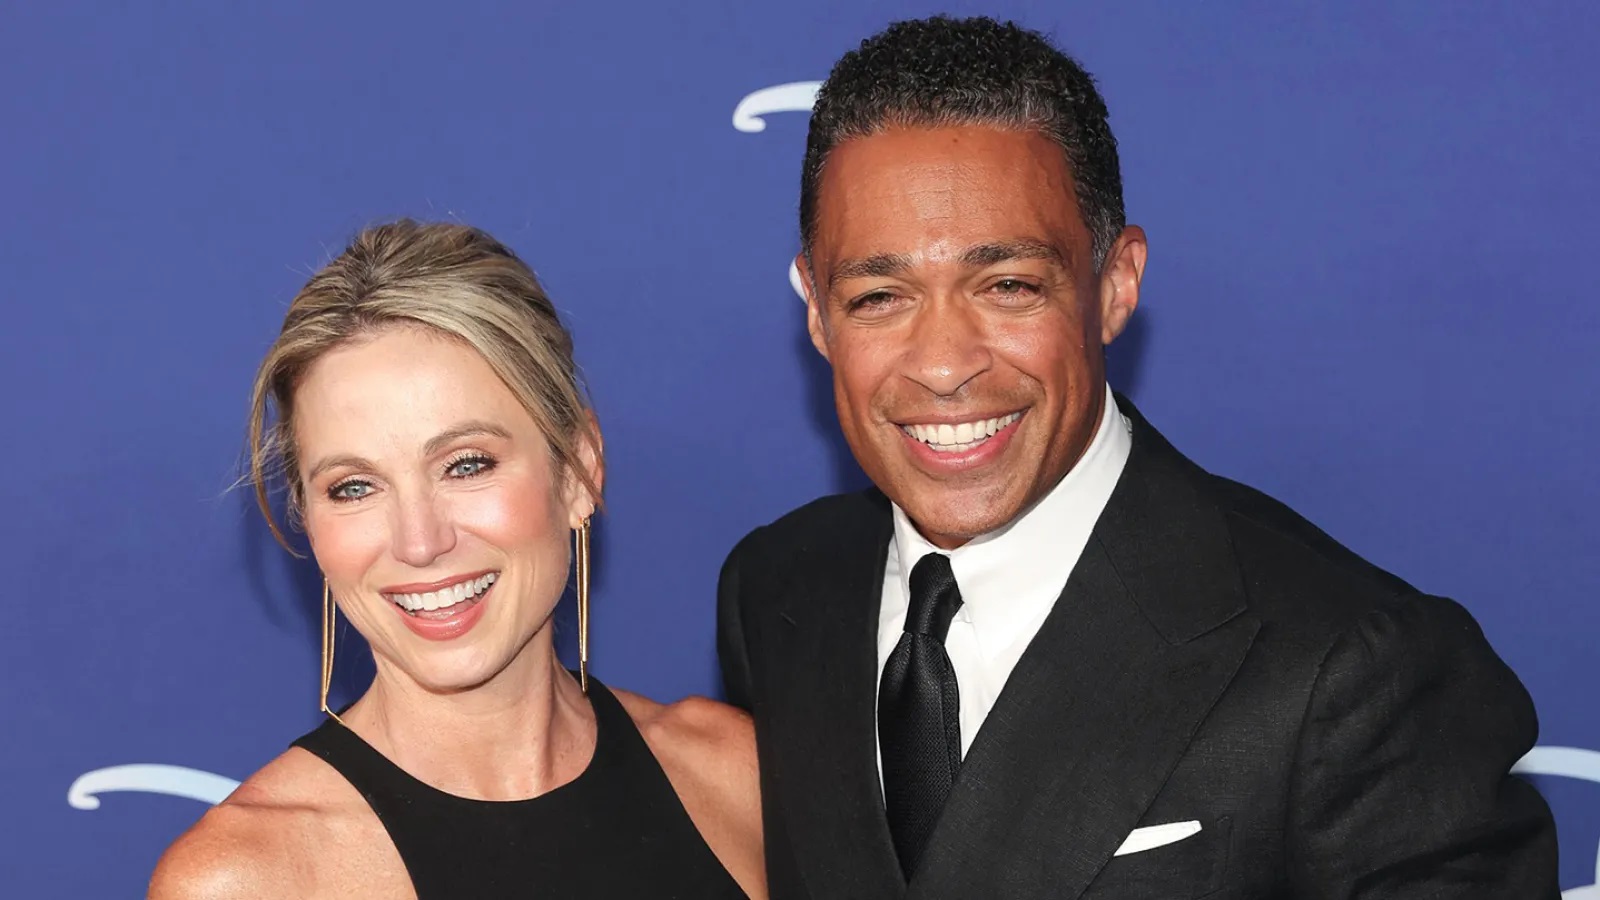 Report: Amy Robach And T.J. Holmes’ Ex Spouses Are Dating Each Other